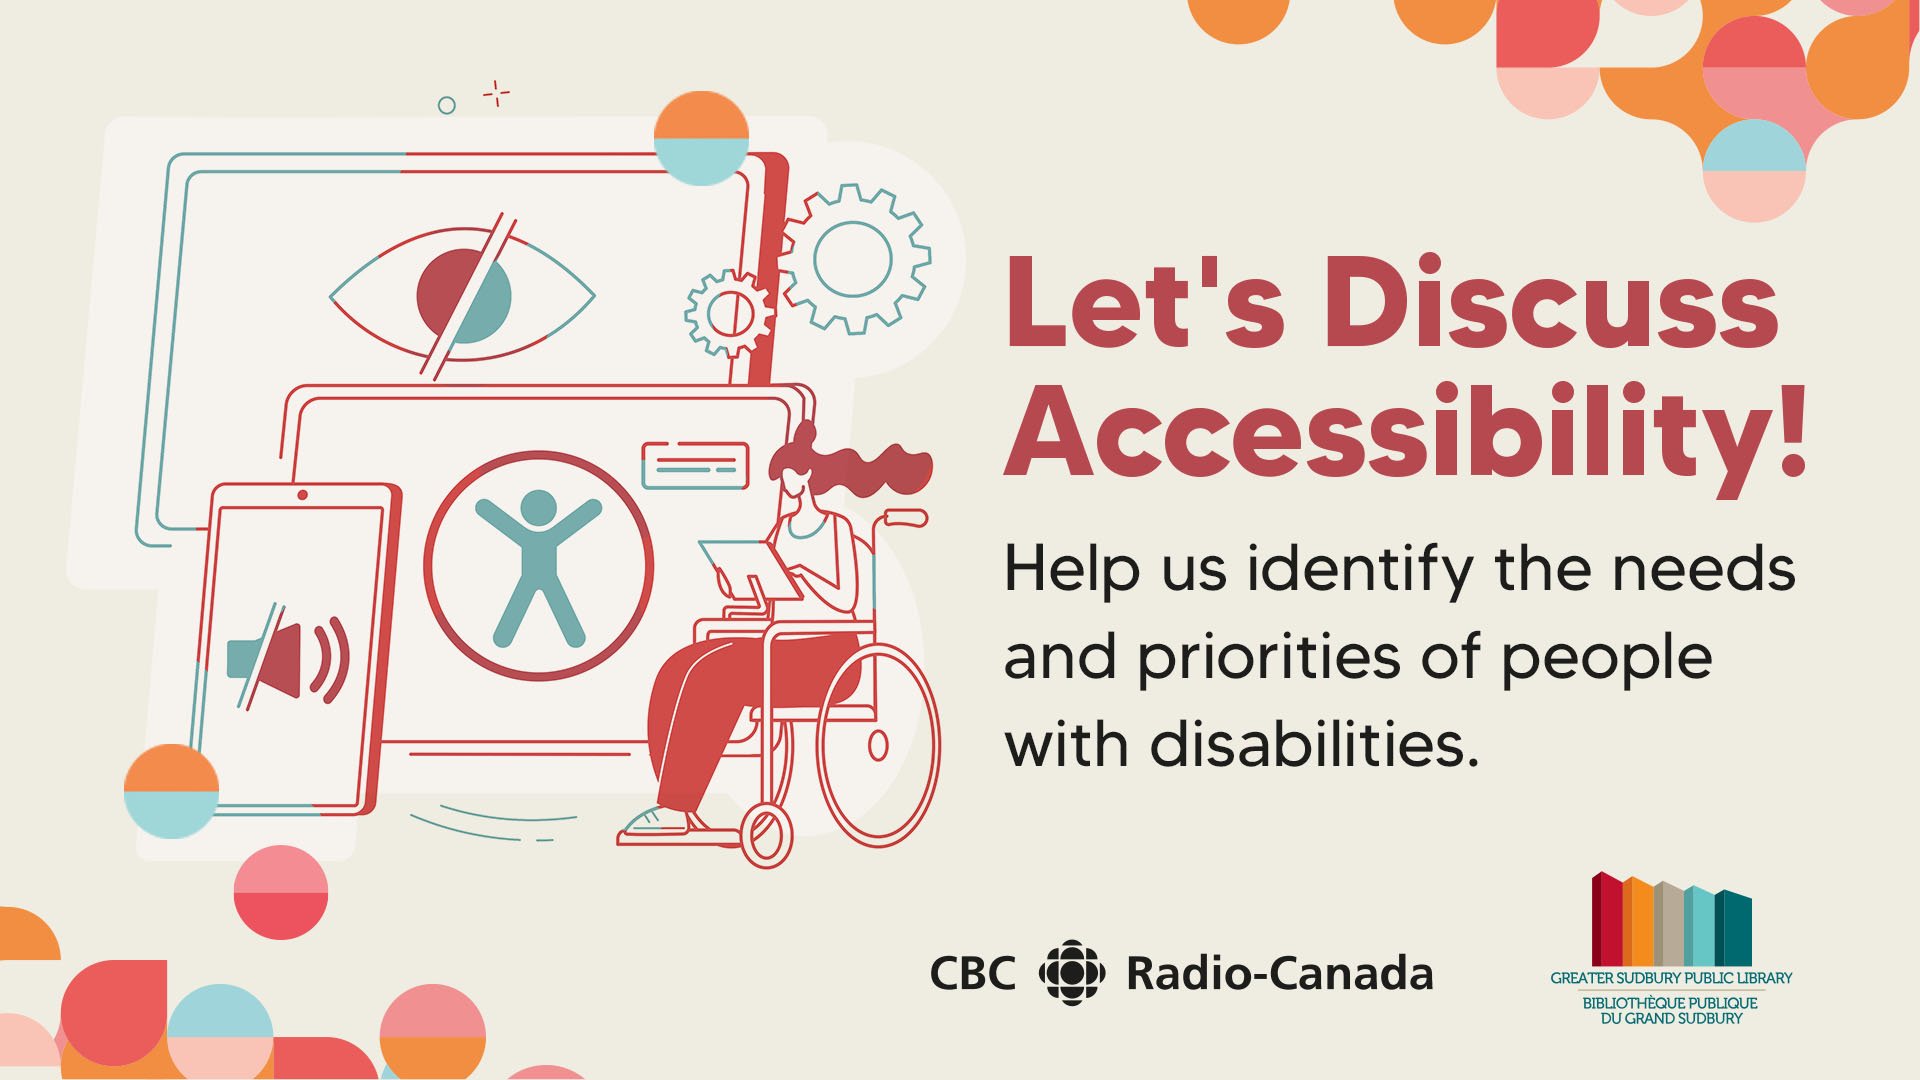 Let's discuss accessibility! Help us identify the needs and priorities of people with disabilities. CBC logo. GSPL logo.